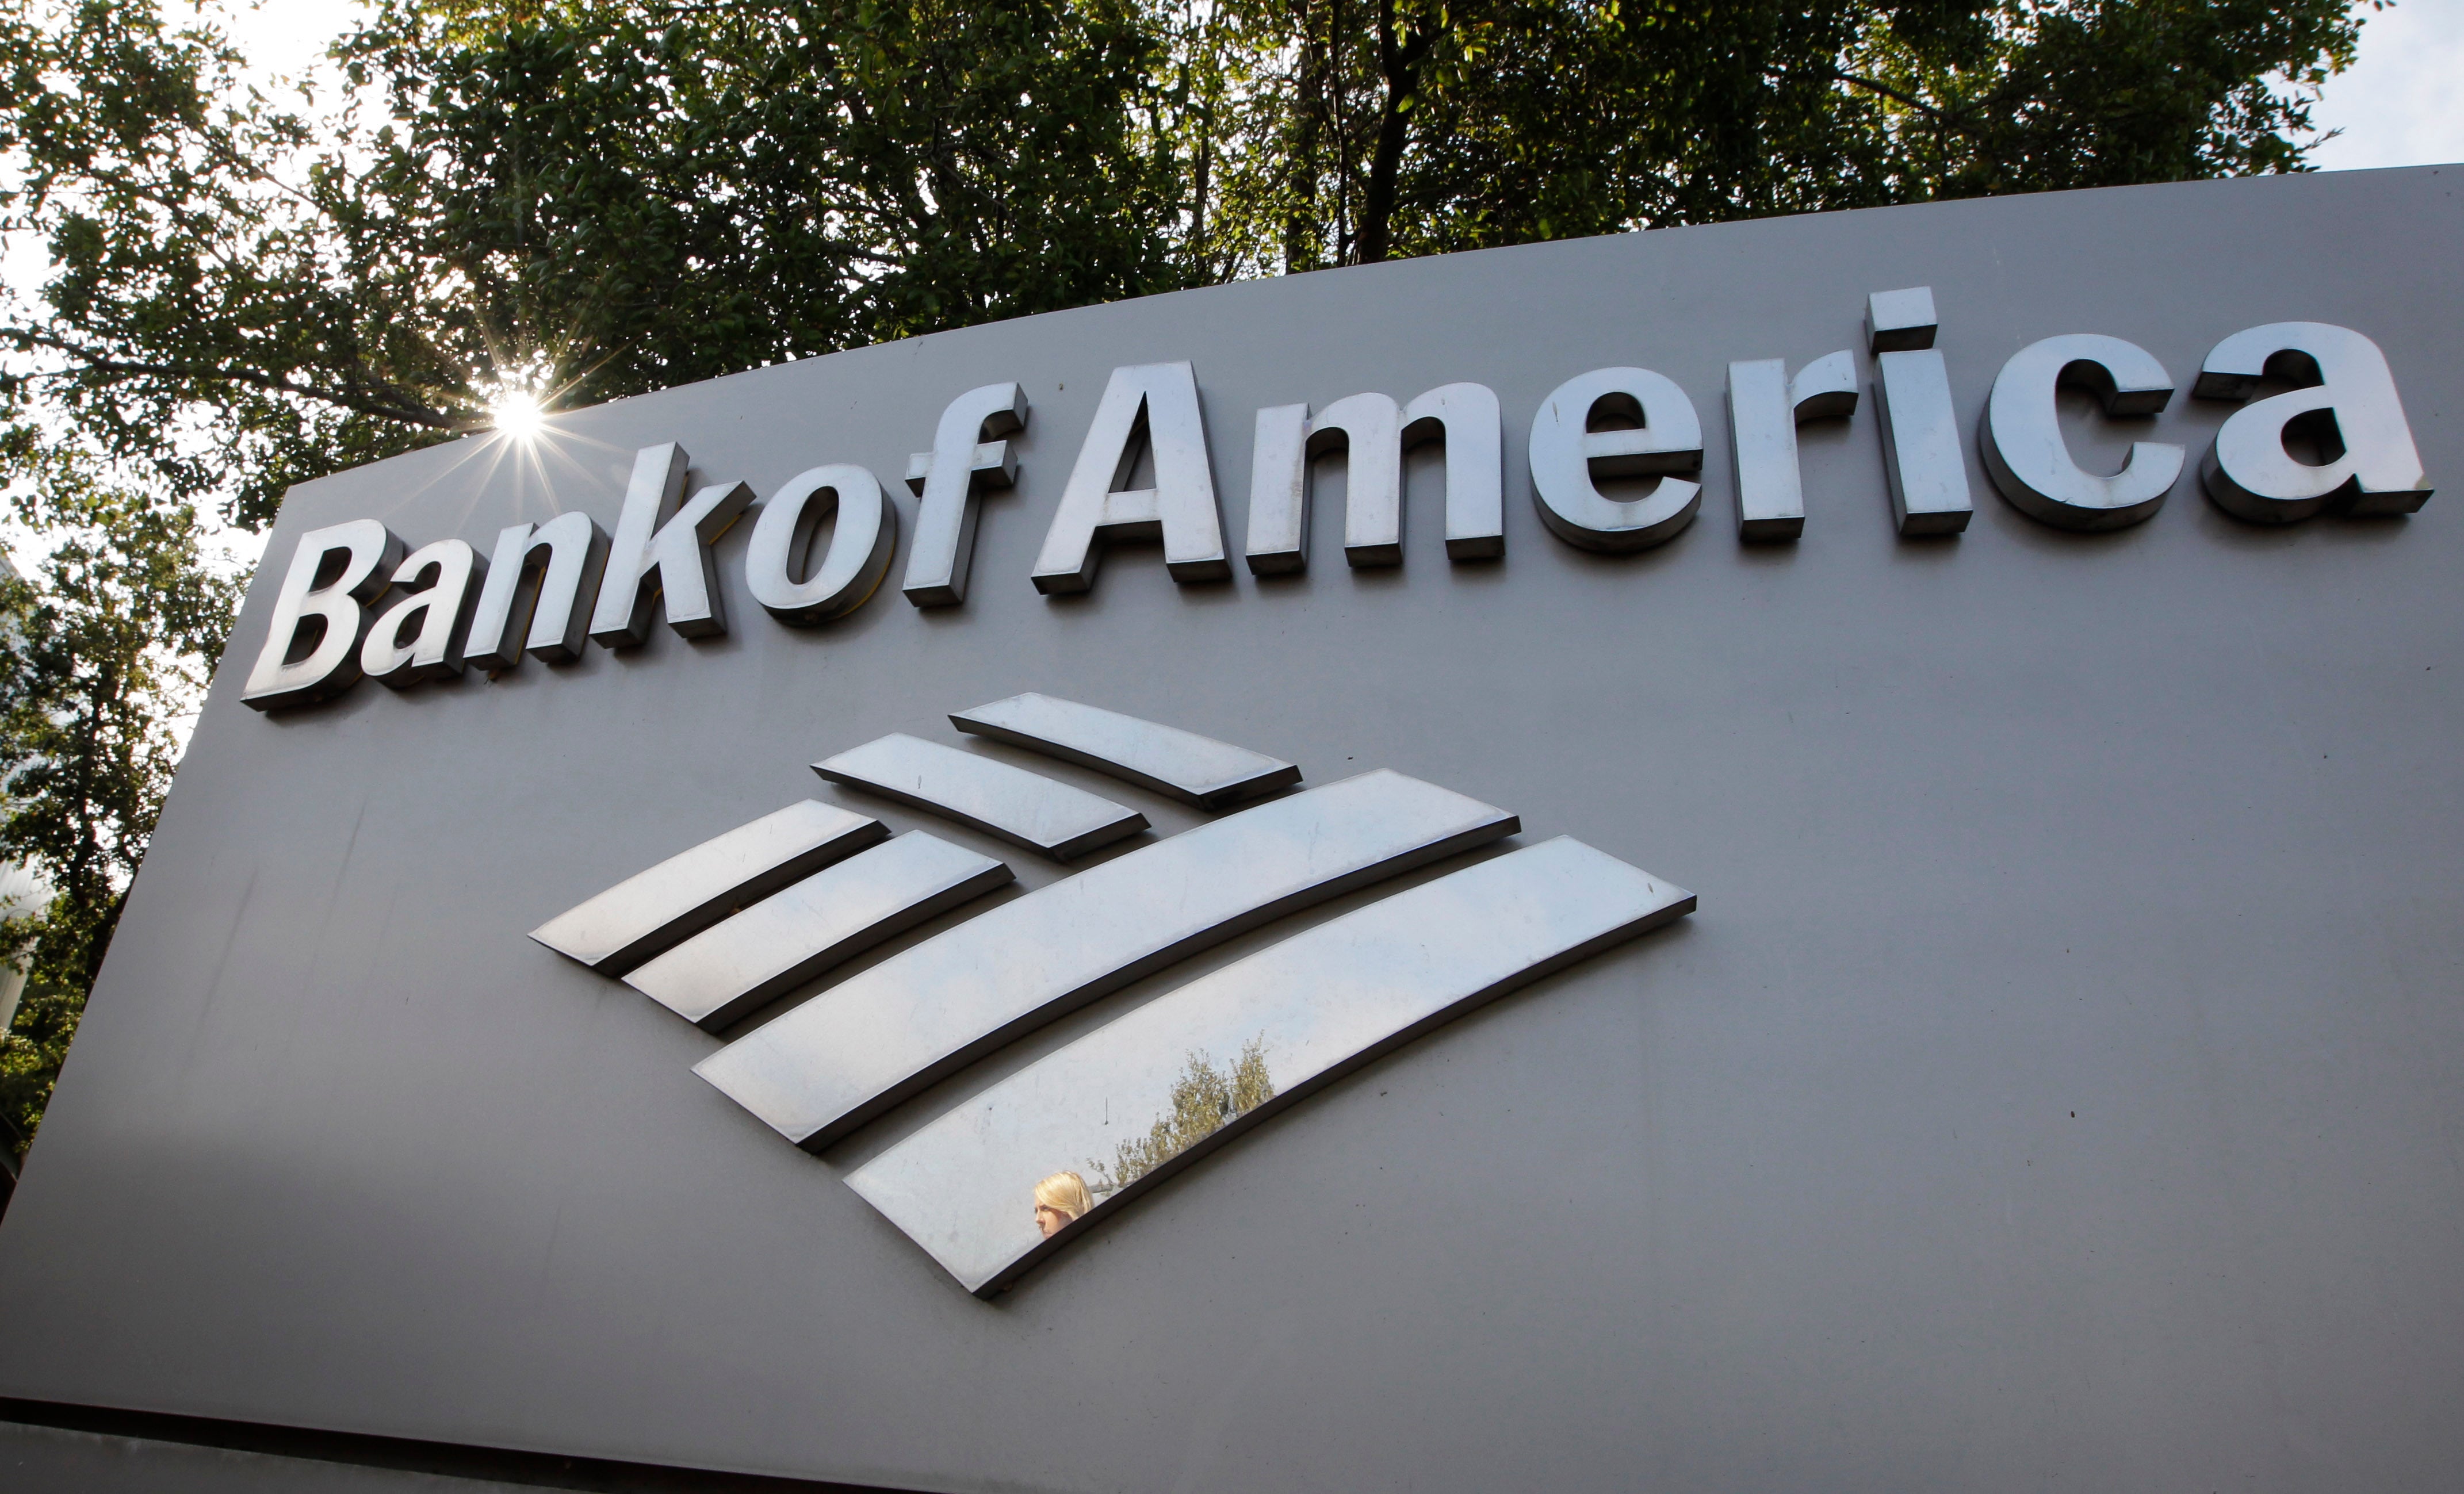 Bank of America's overdraft fees down 90 under new policy The